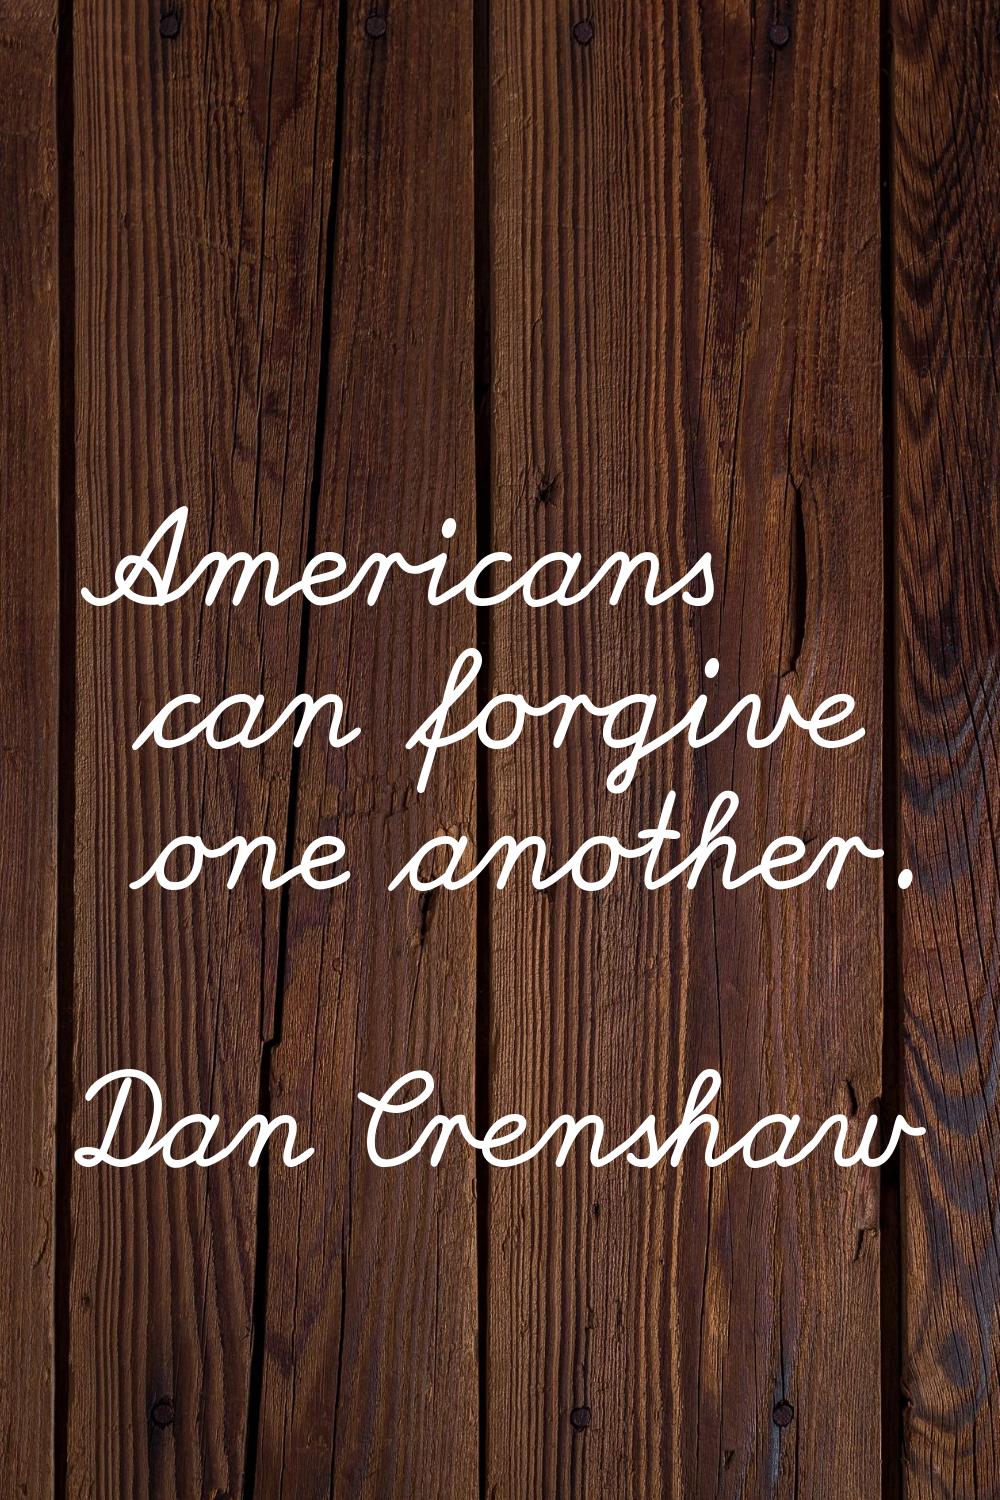 Americans can forgive one another.